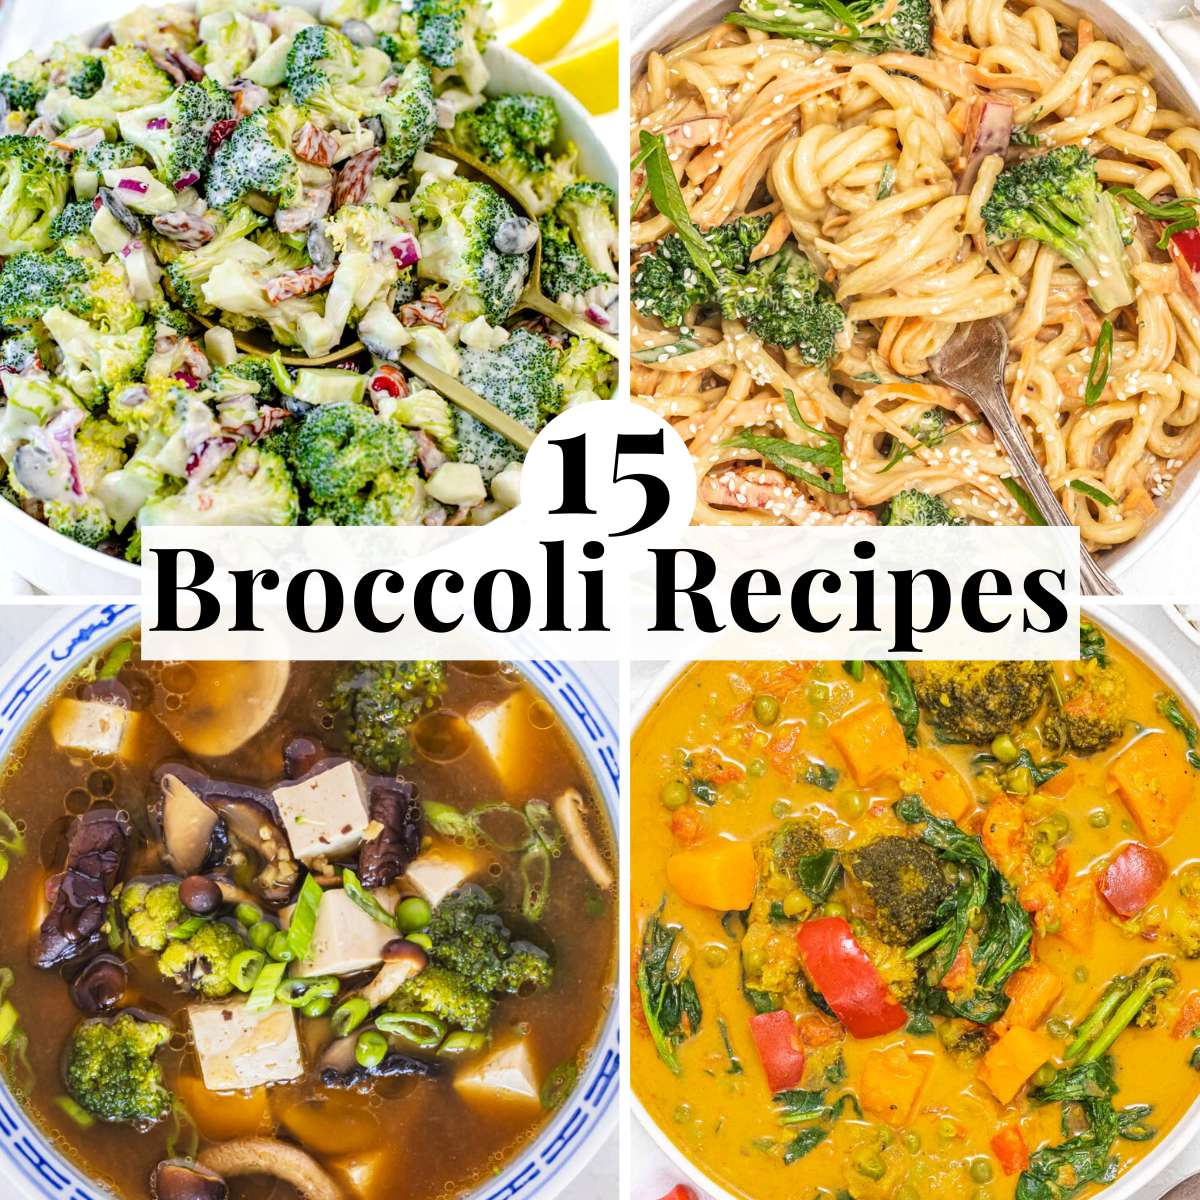 Broccoli recipes with soups, noodles, salads, and curries